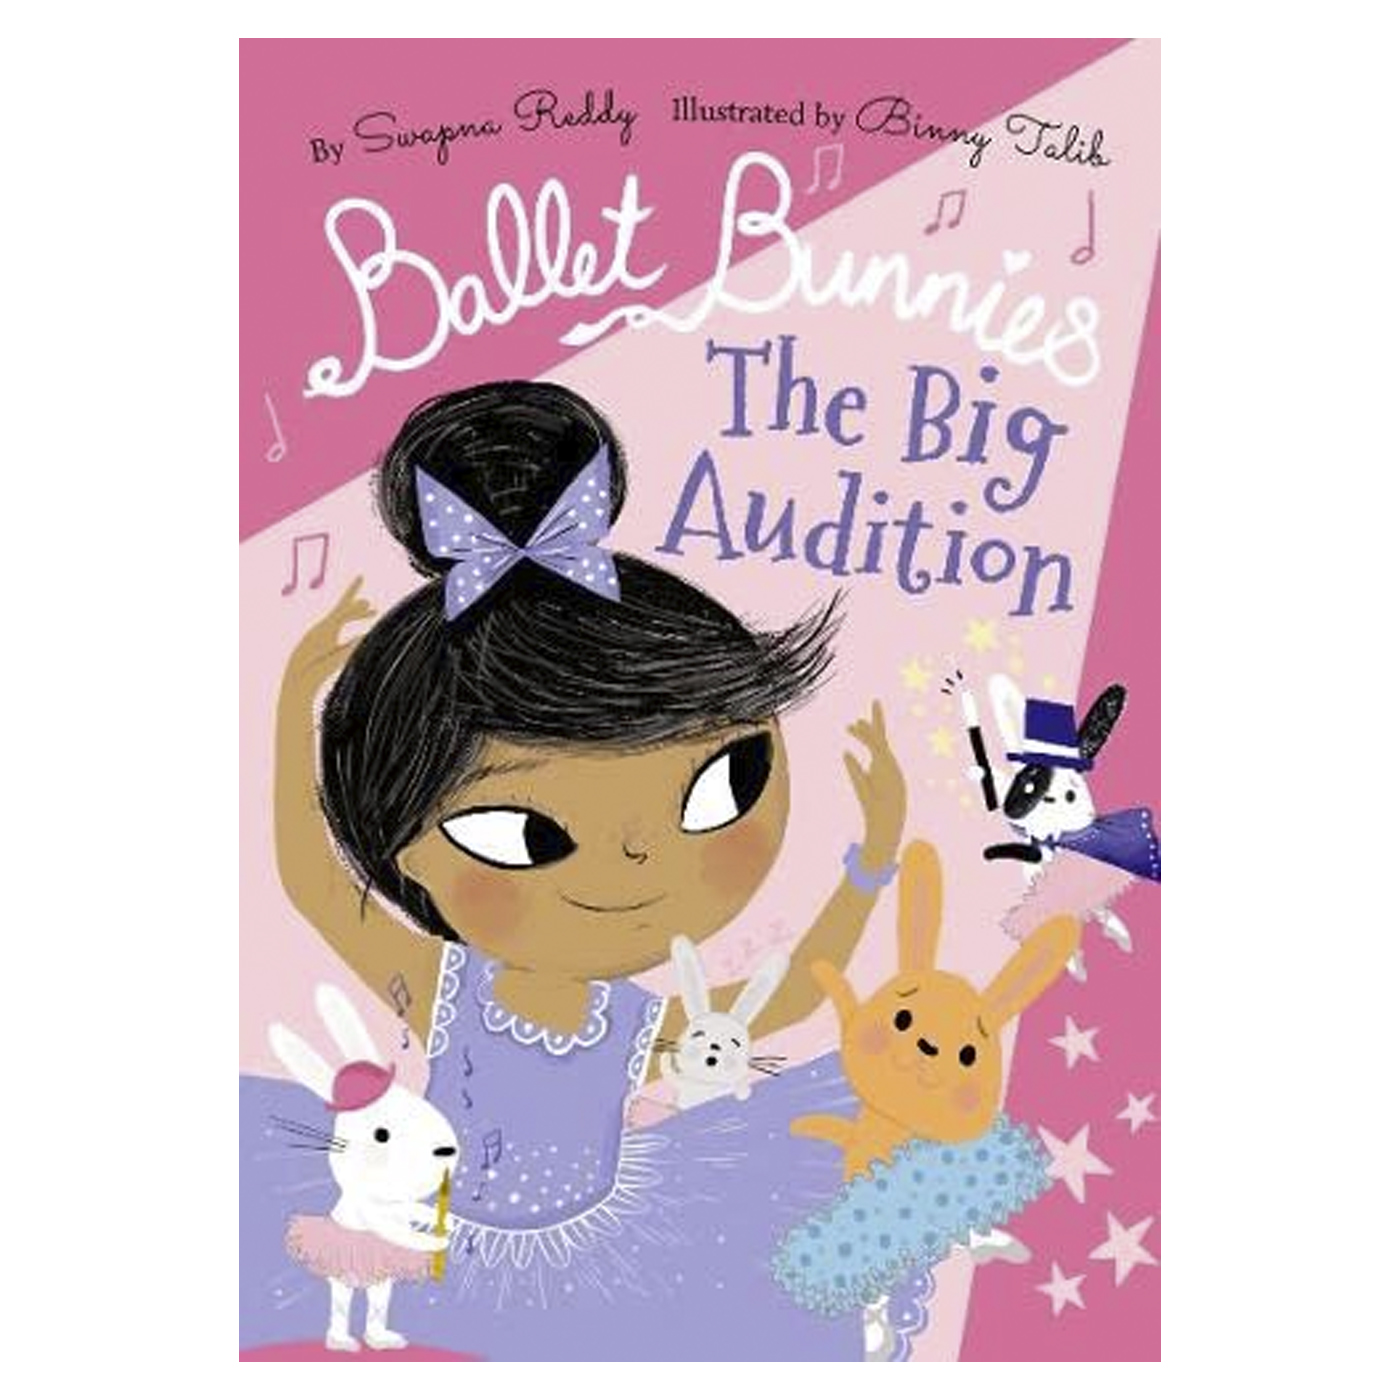 OXFORD CHILDRENS BOOK Ballet Bunnies: The Big Audition